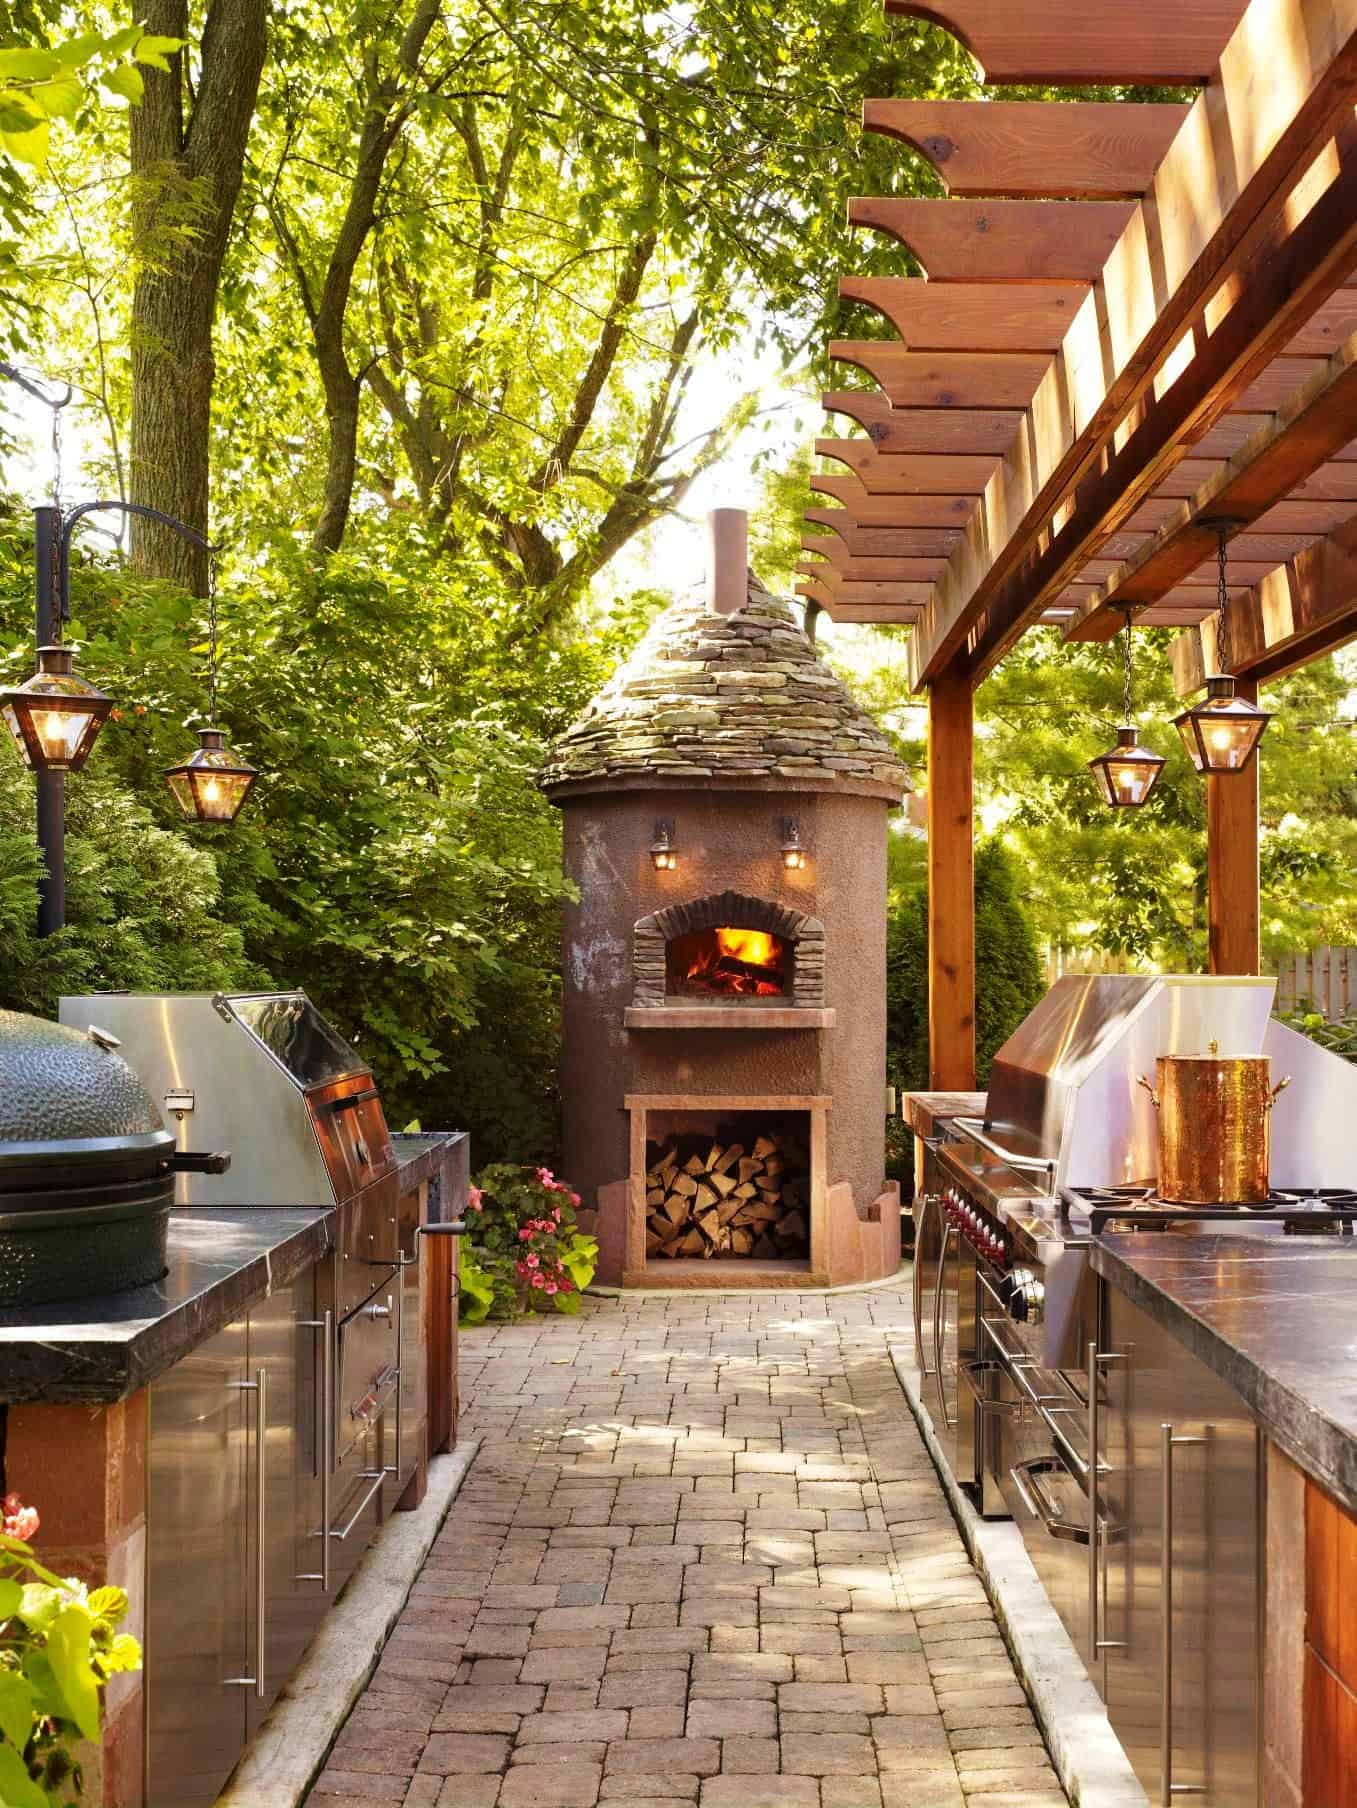 pizza oven outside Outdoor kitchens that will make you want to spend more time outside